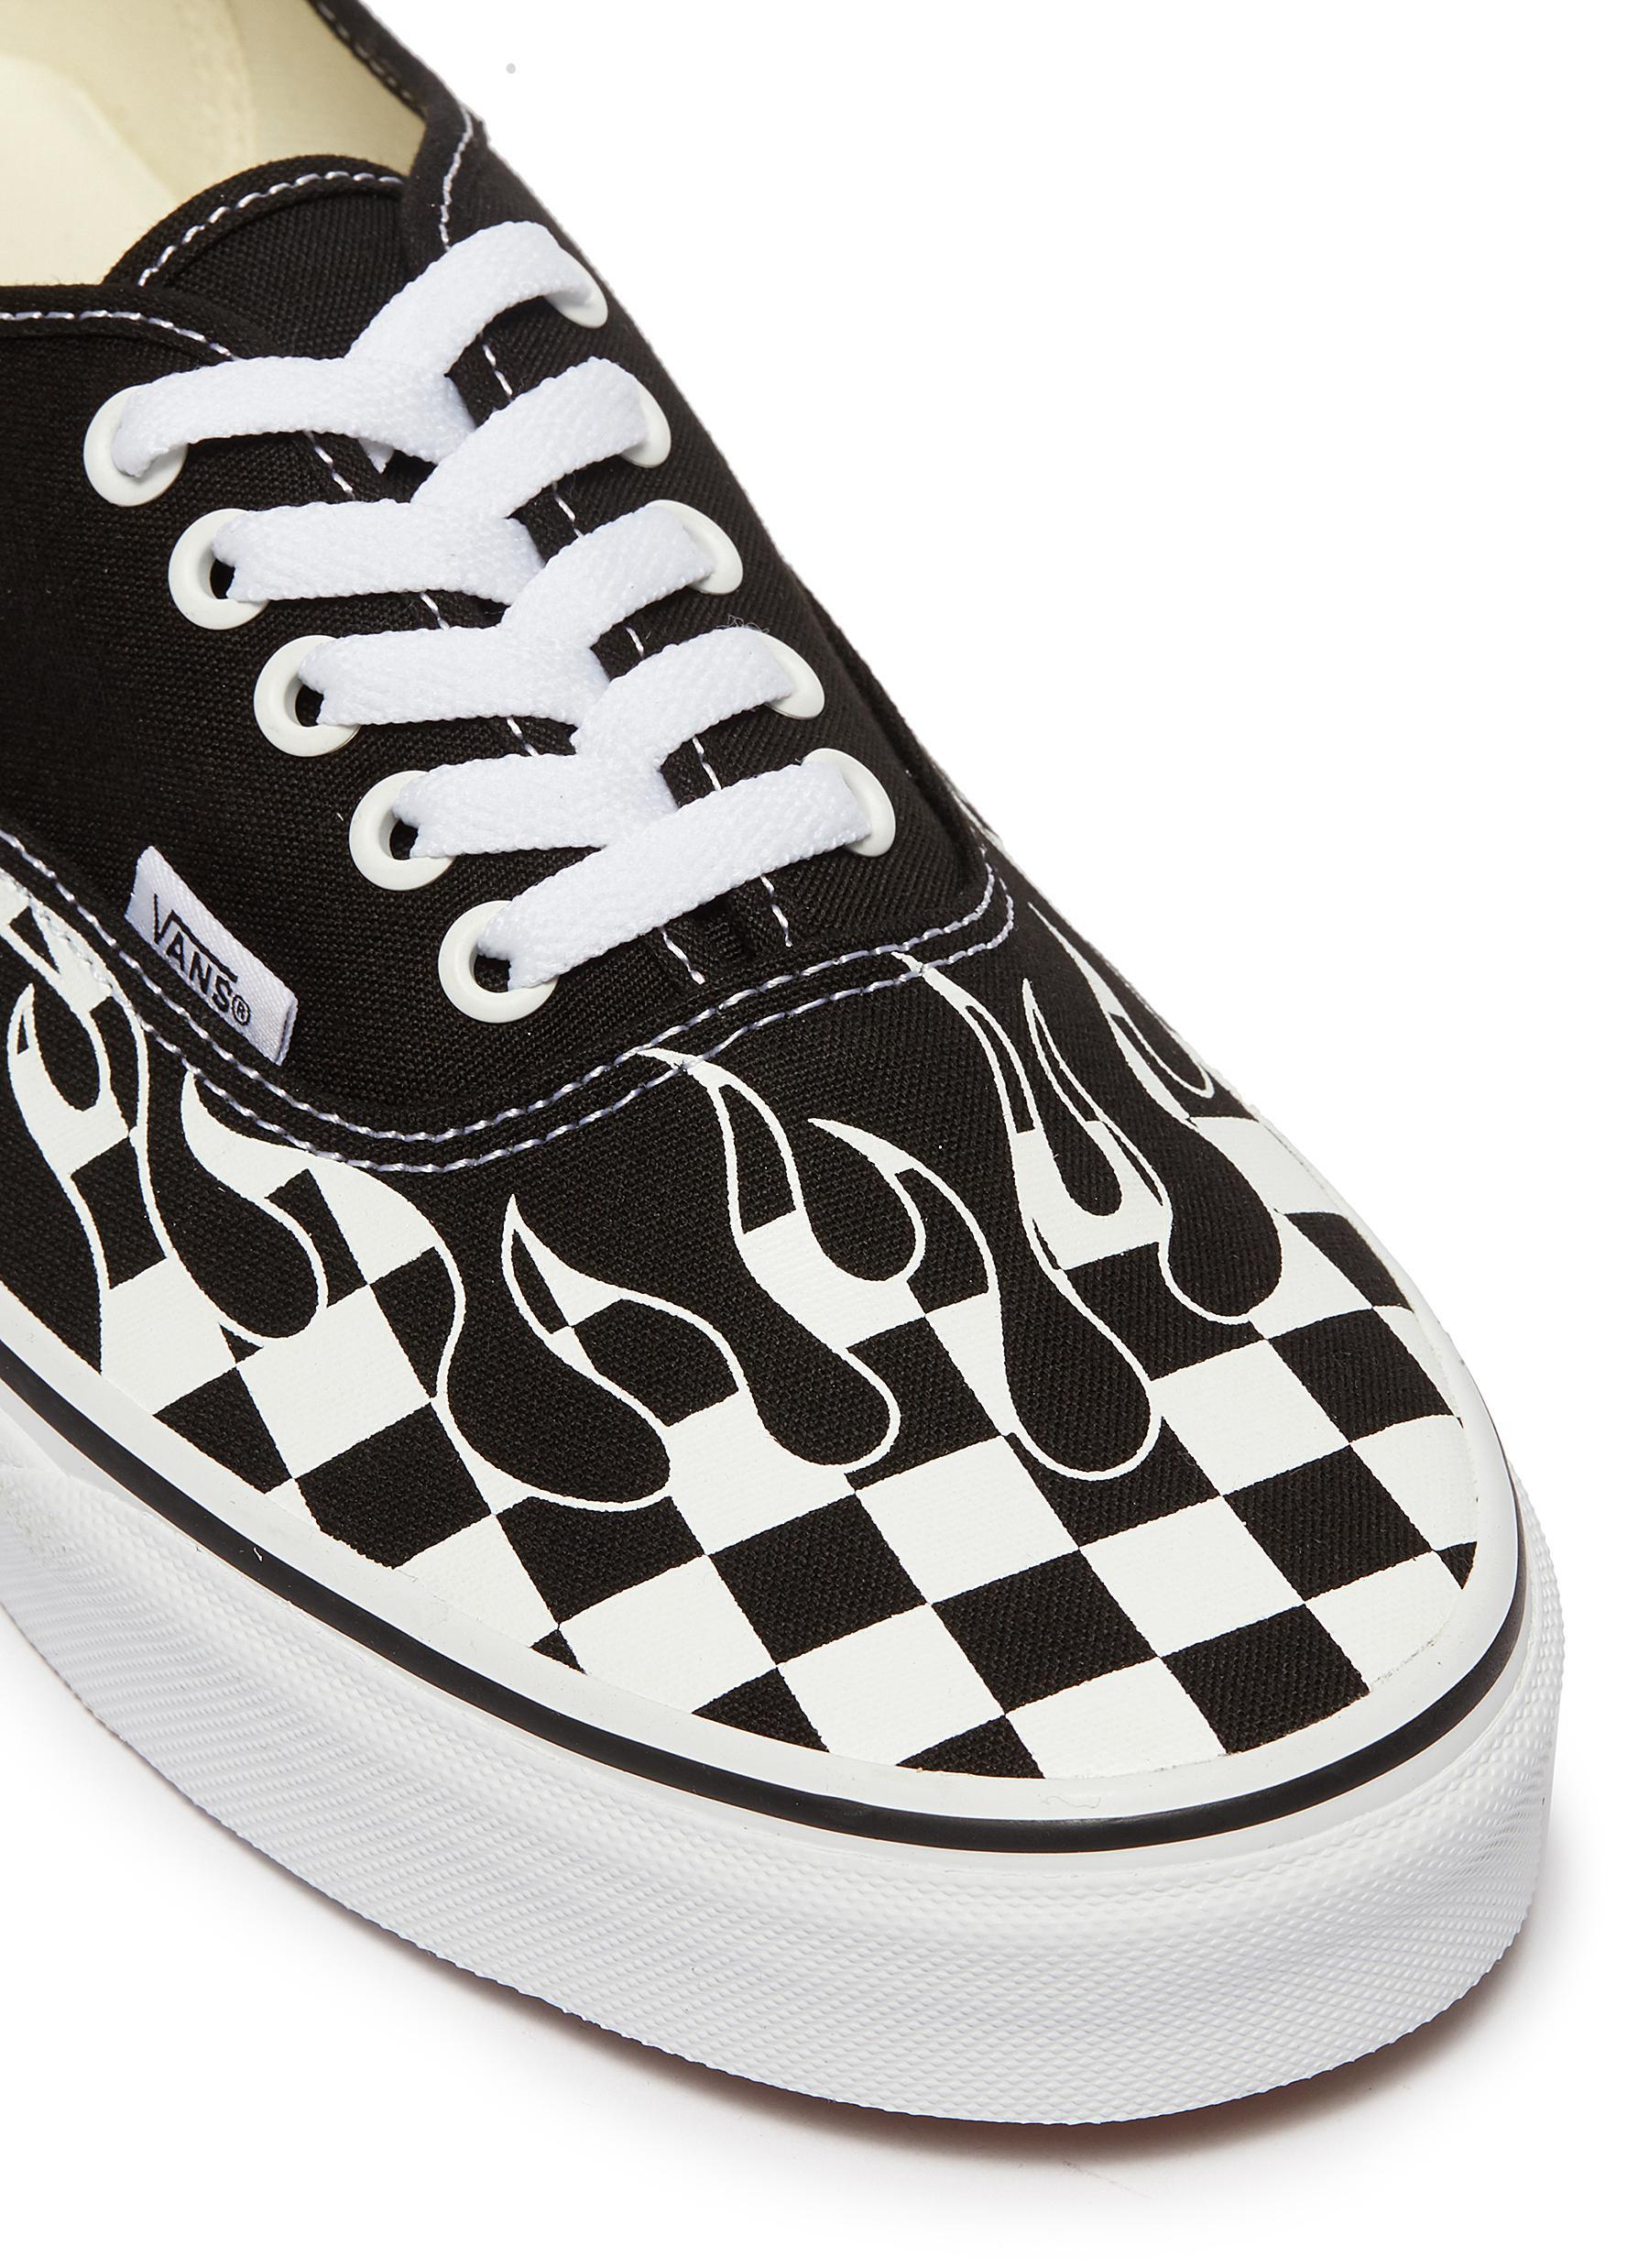 Flame Checkered Vans Top Sellers, 55% OFF | www.ingeniovirtual.com